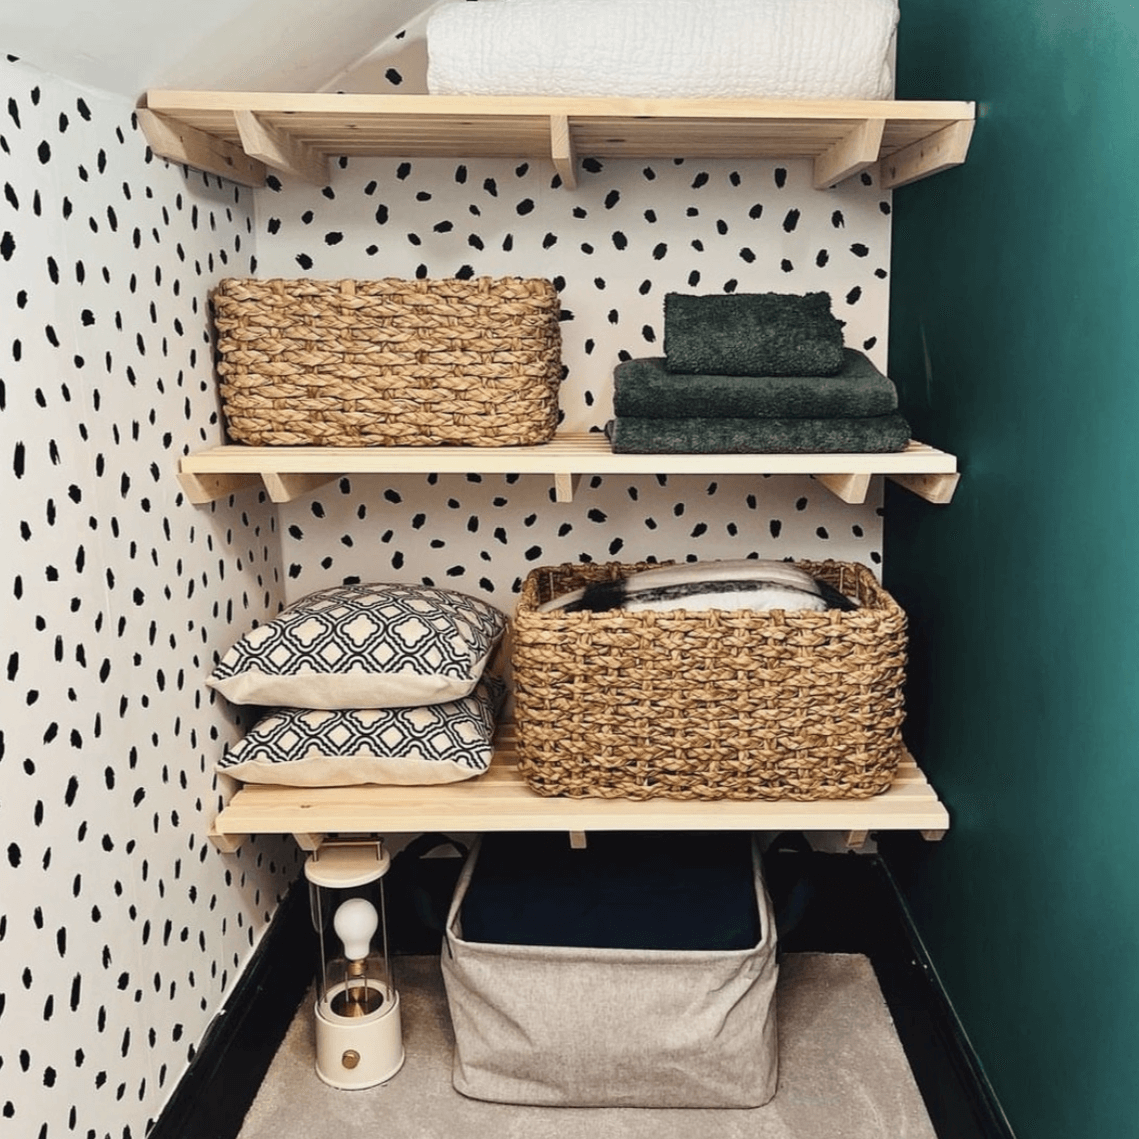 Airing Cupboard Wooden Slatted Shelves - 30 cm by 49 cm